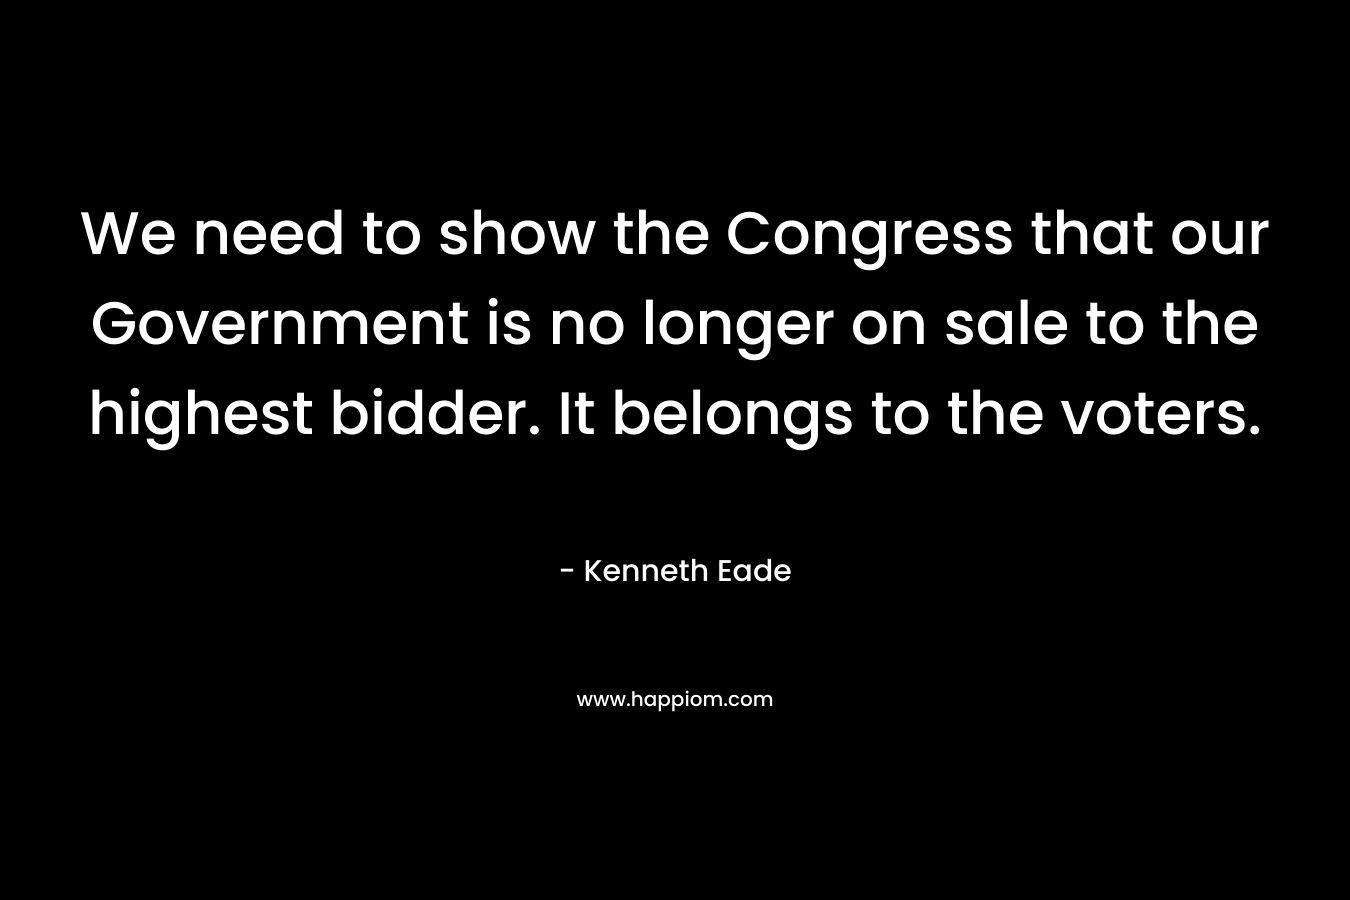 We need to show the Congress that our Government is no longer on sale to the highest bidder. It belongs to the voters.